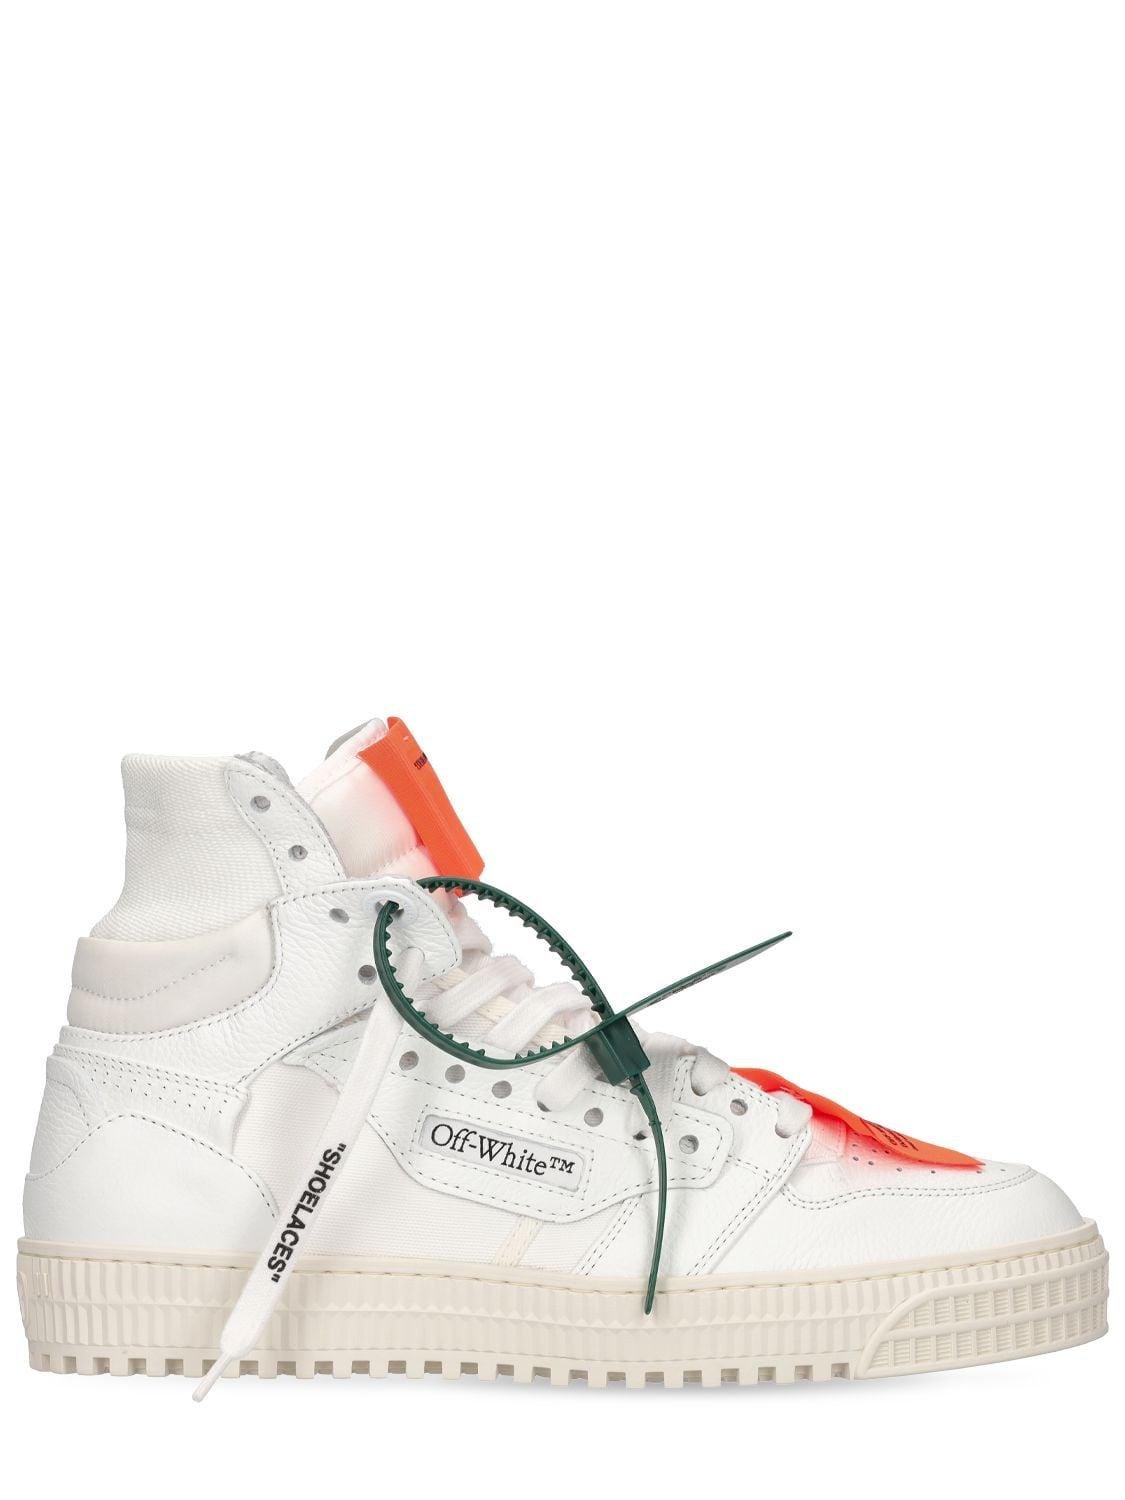 3.0 Off Court Leather High Top Sneakers by OFF-WHITE